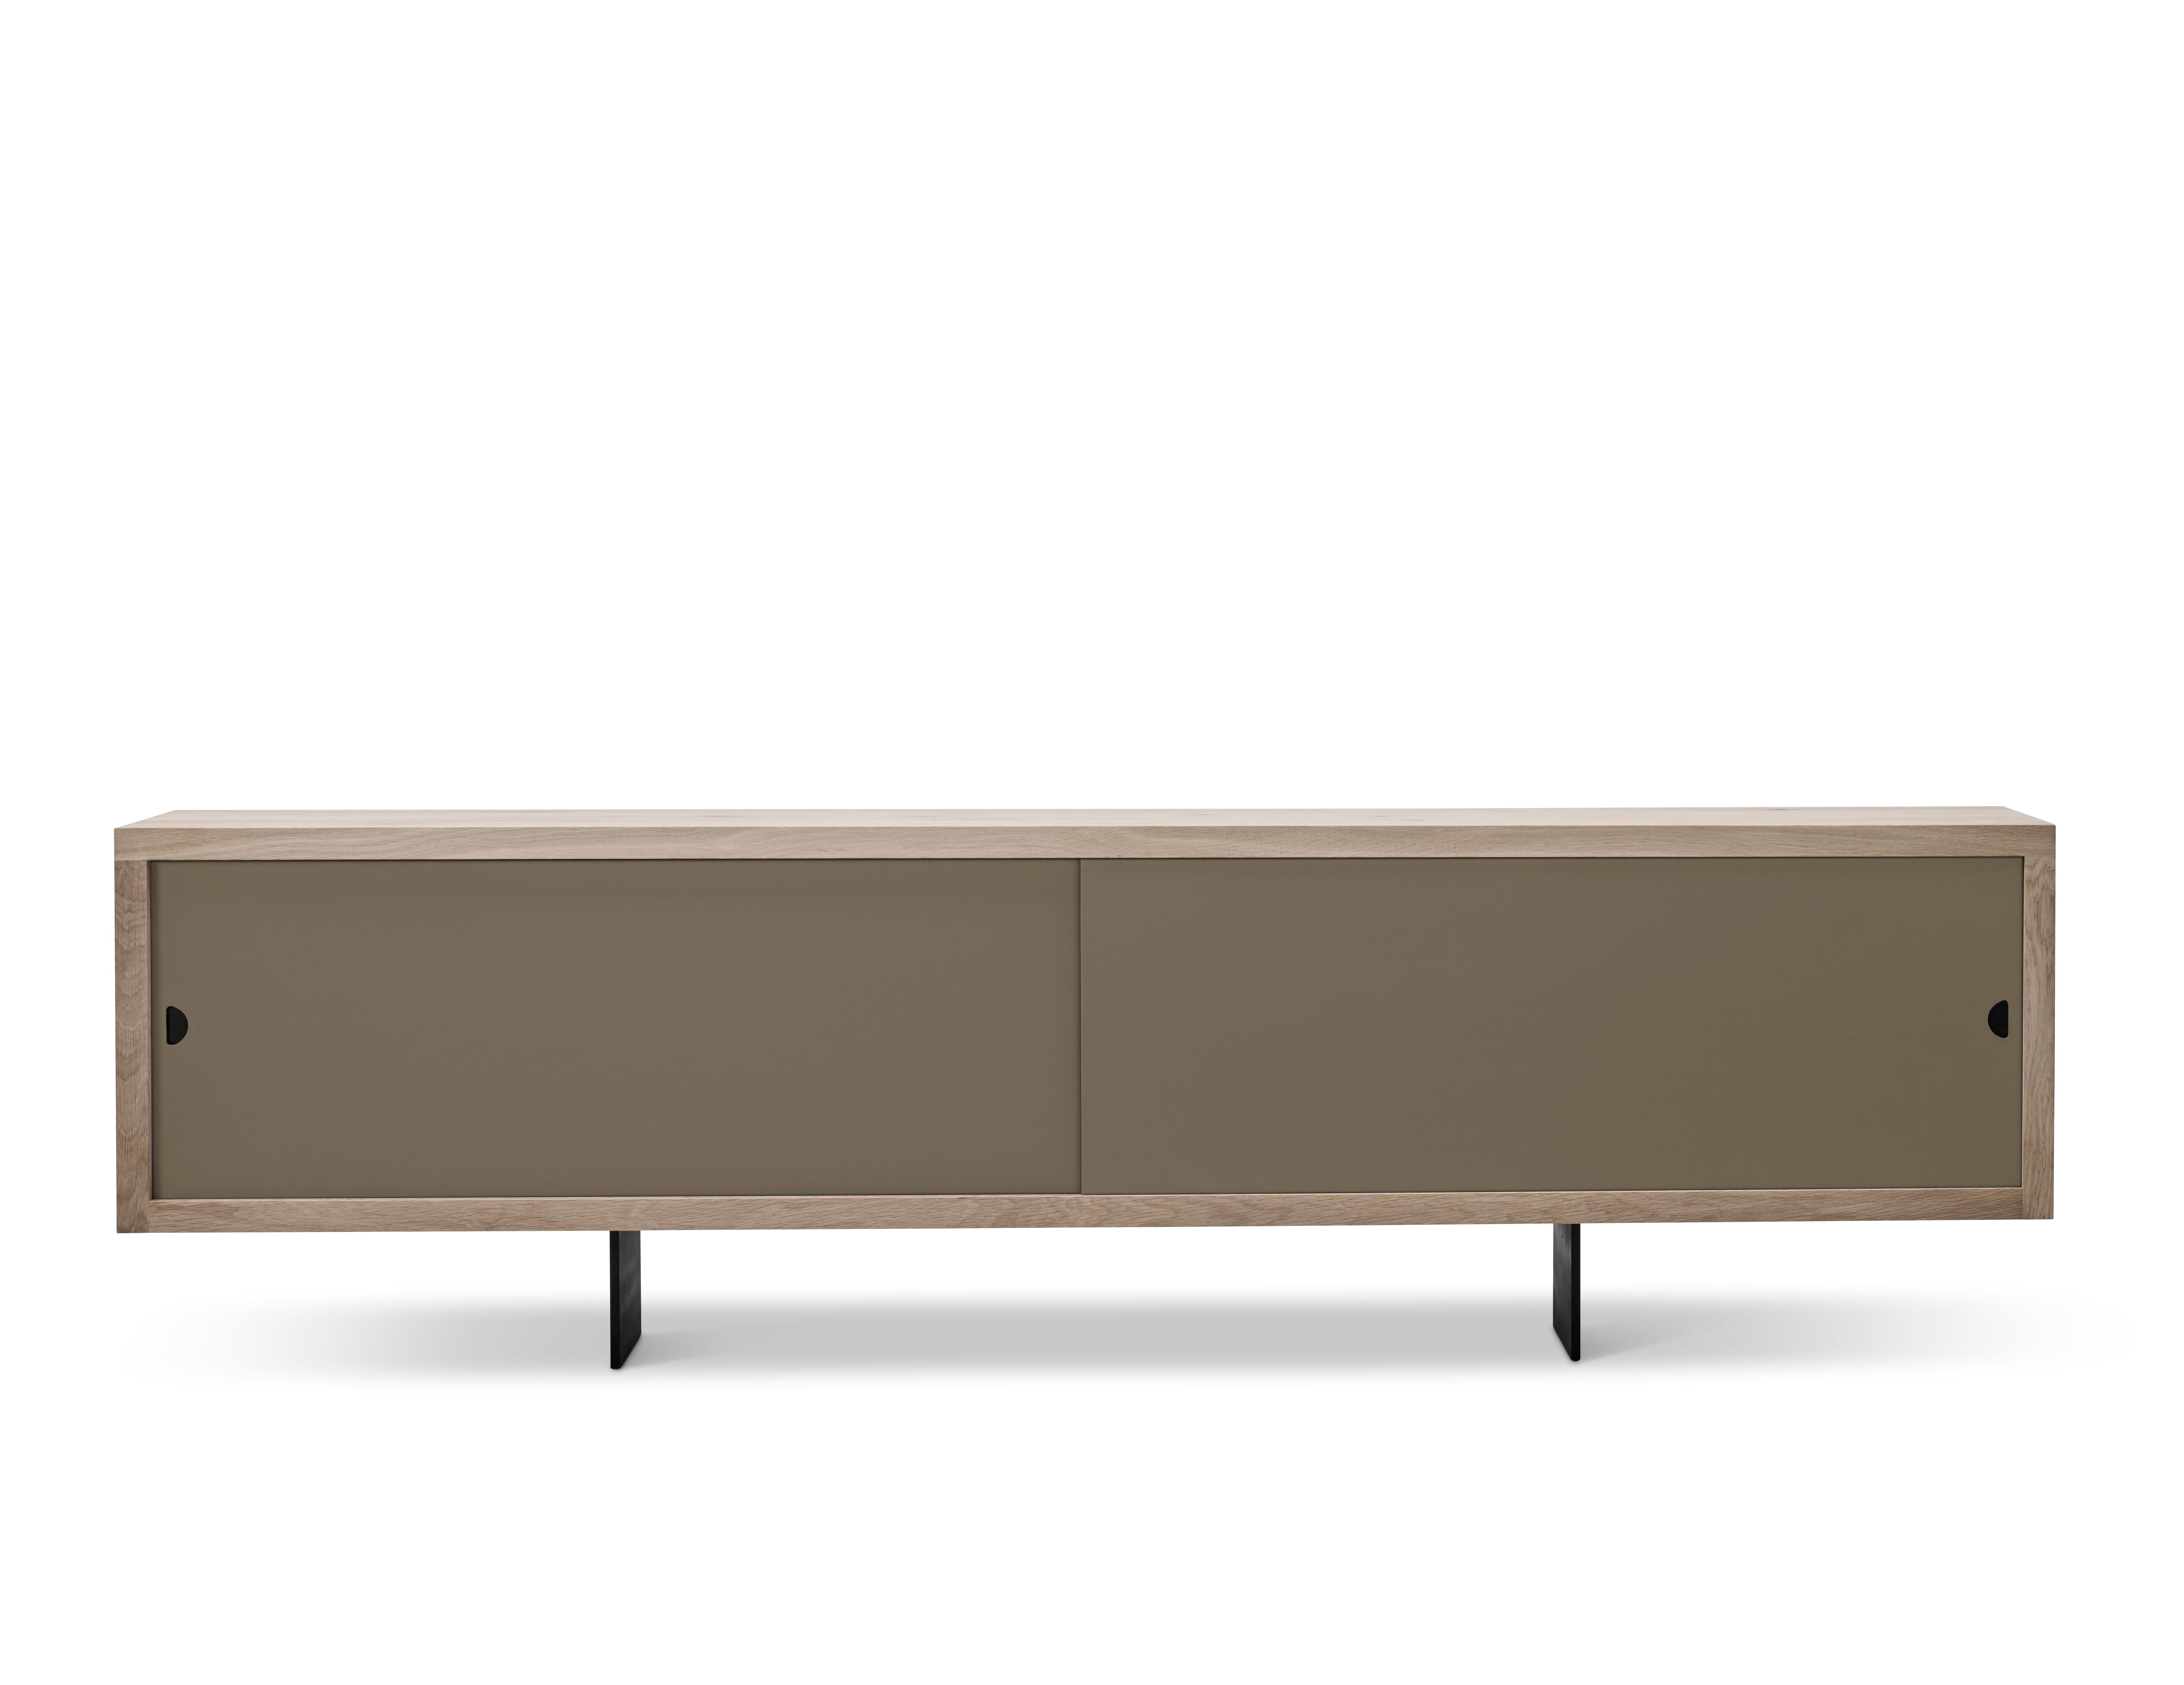 GRAND Sideboard by Jacob Plejdrup for DK3, 2016

Sideboard with sliding doors, available in castoro, beige, black or white.
Model in the picture: Castoro
Dimensions: H 68 x 50 x 200

---
dk3 is known for the large plank tables, so it was